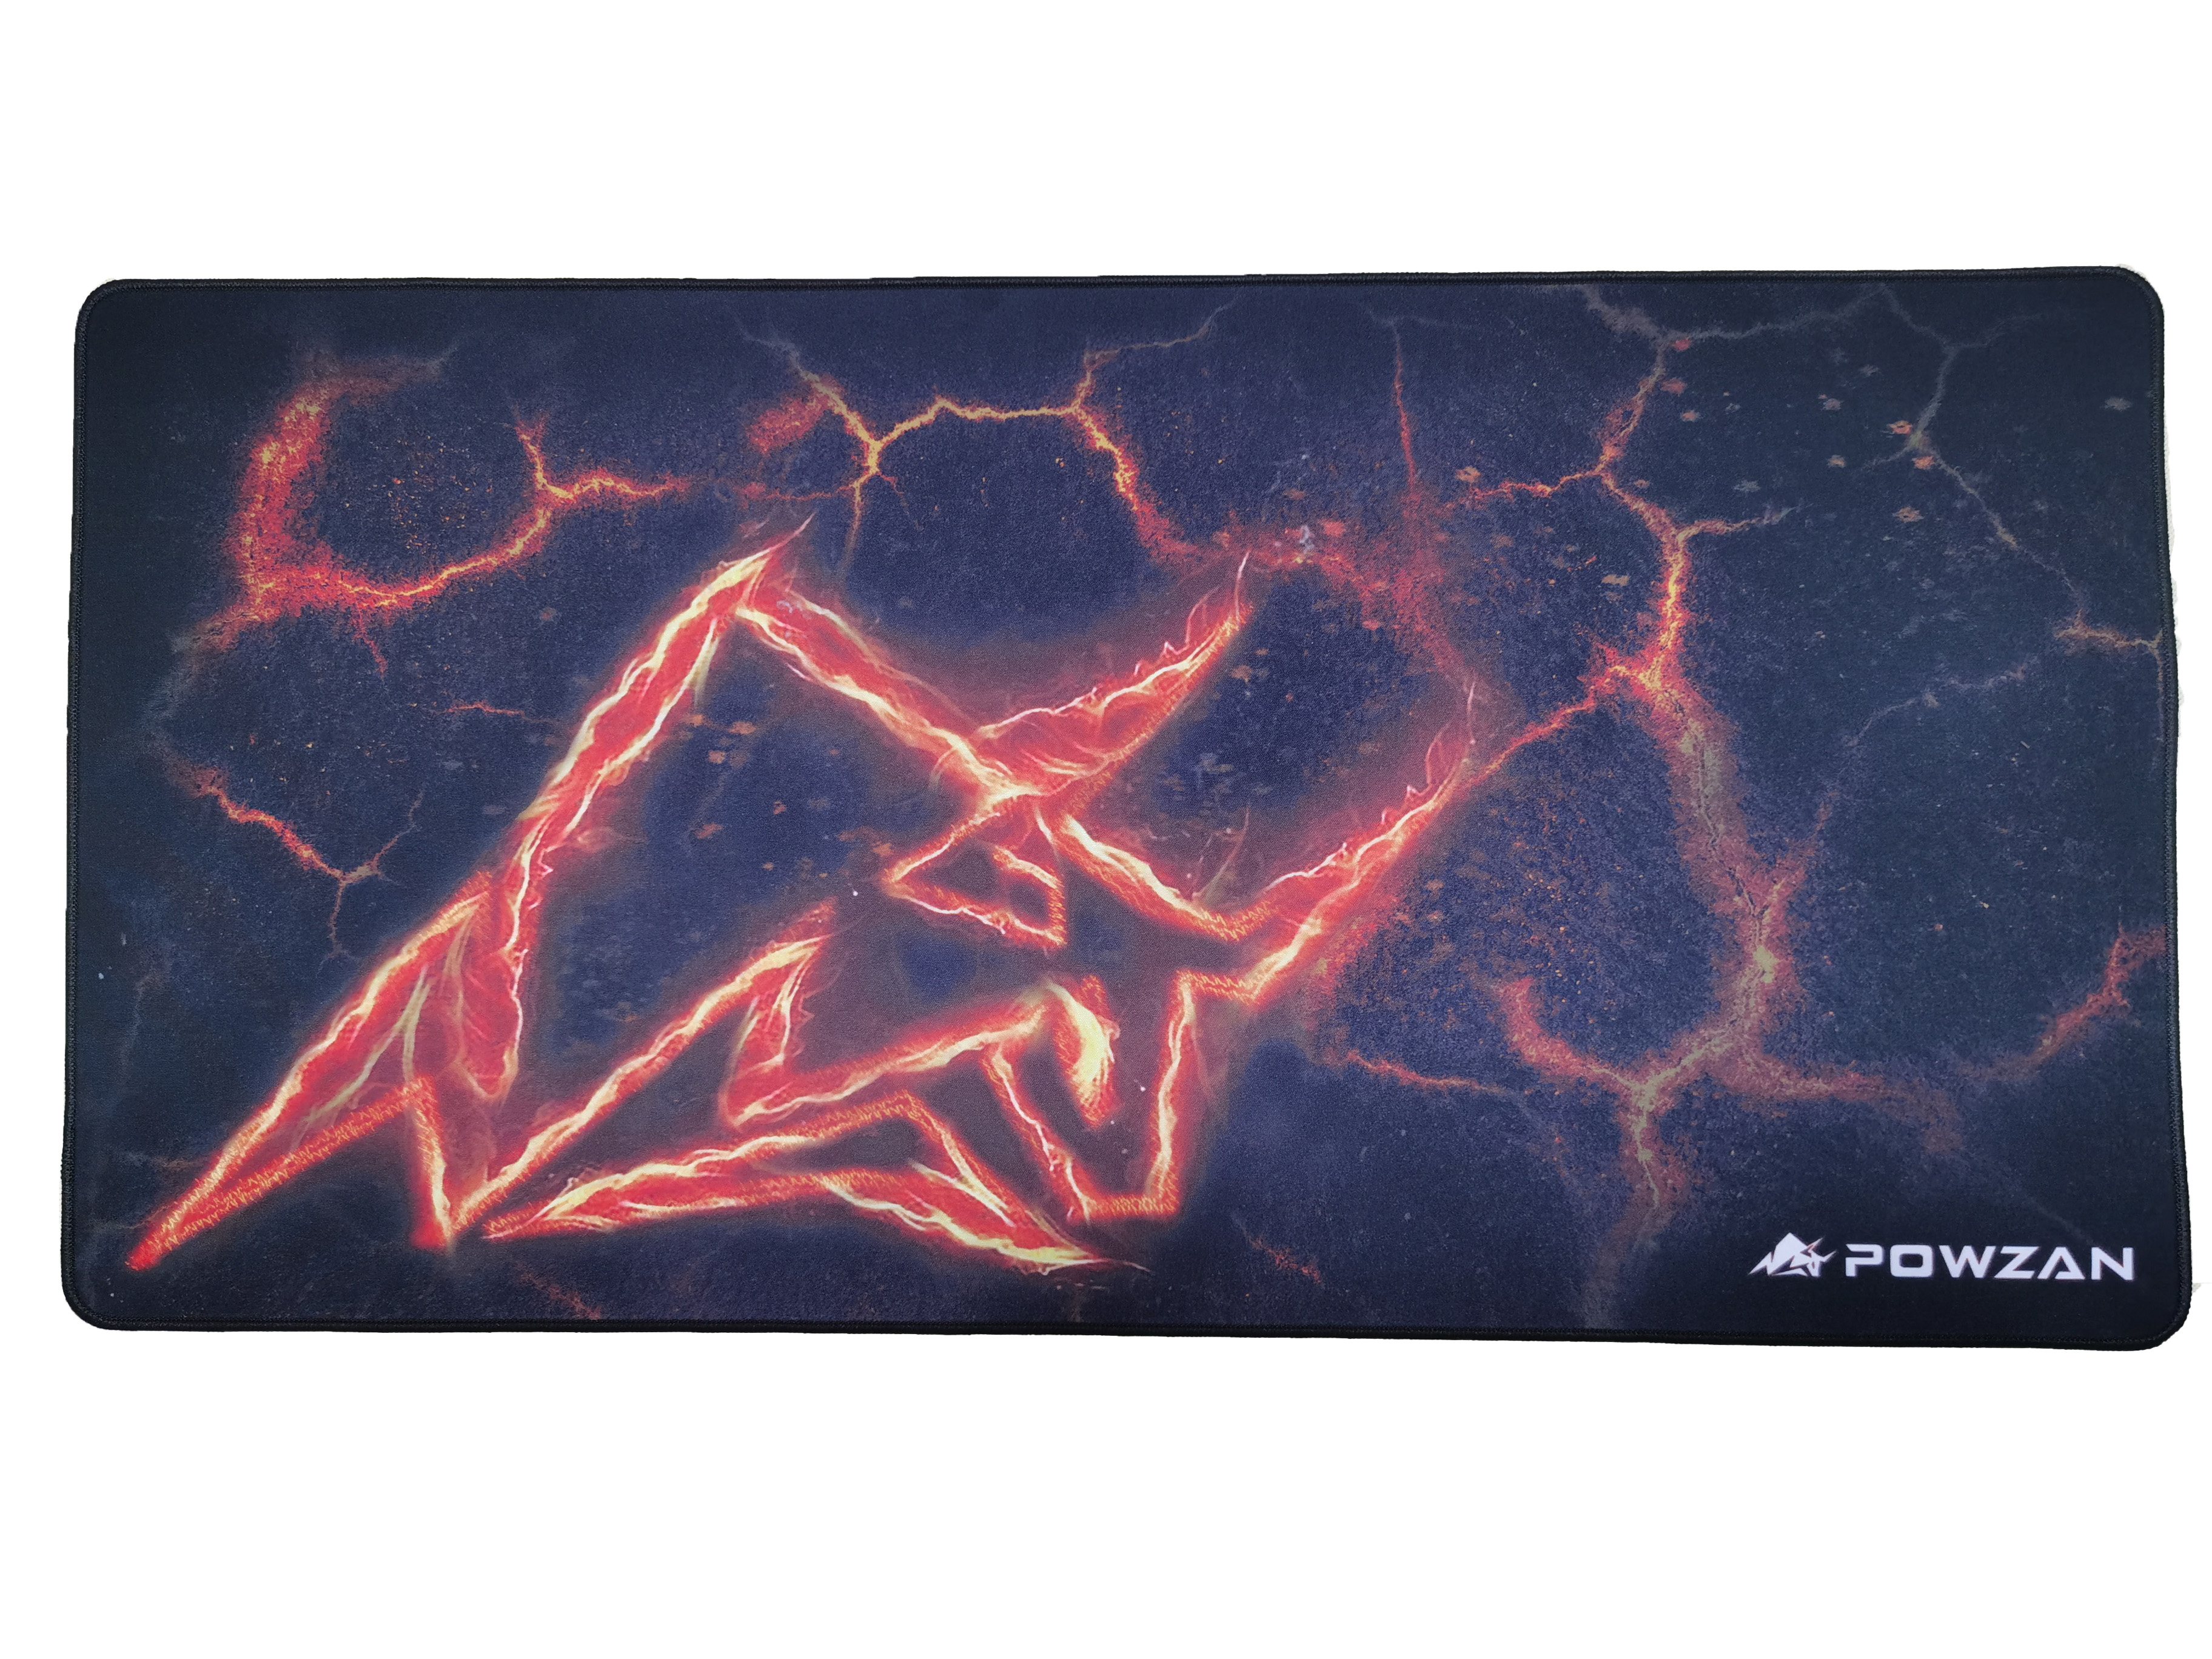 product-Tigerwings-Zodiac Ox of Red Bull mouse pad natural rubber mousepad high quality gaming mouse-1